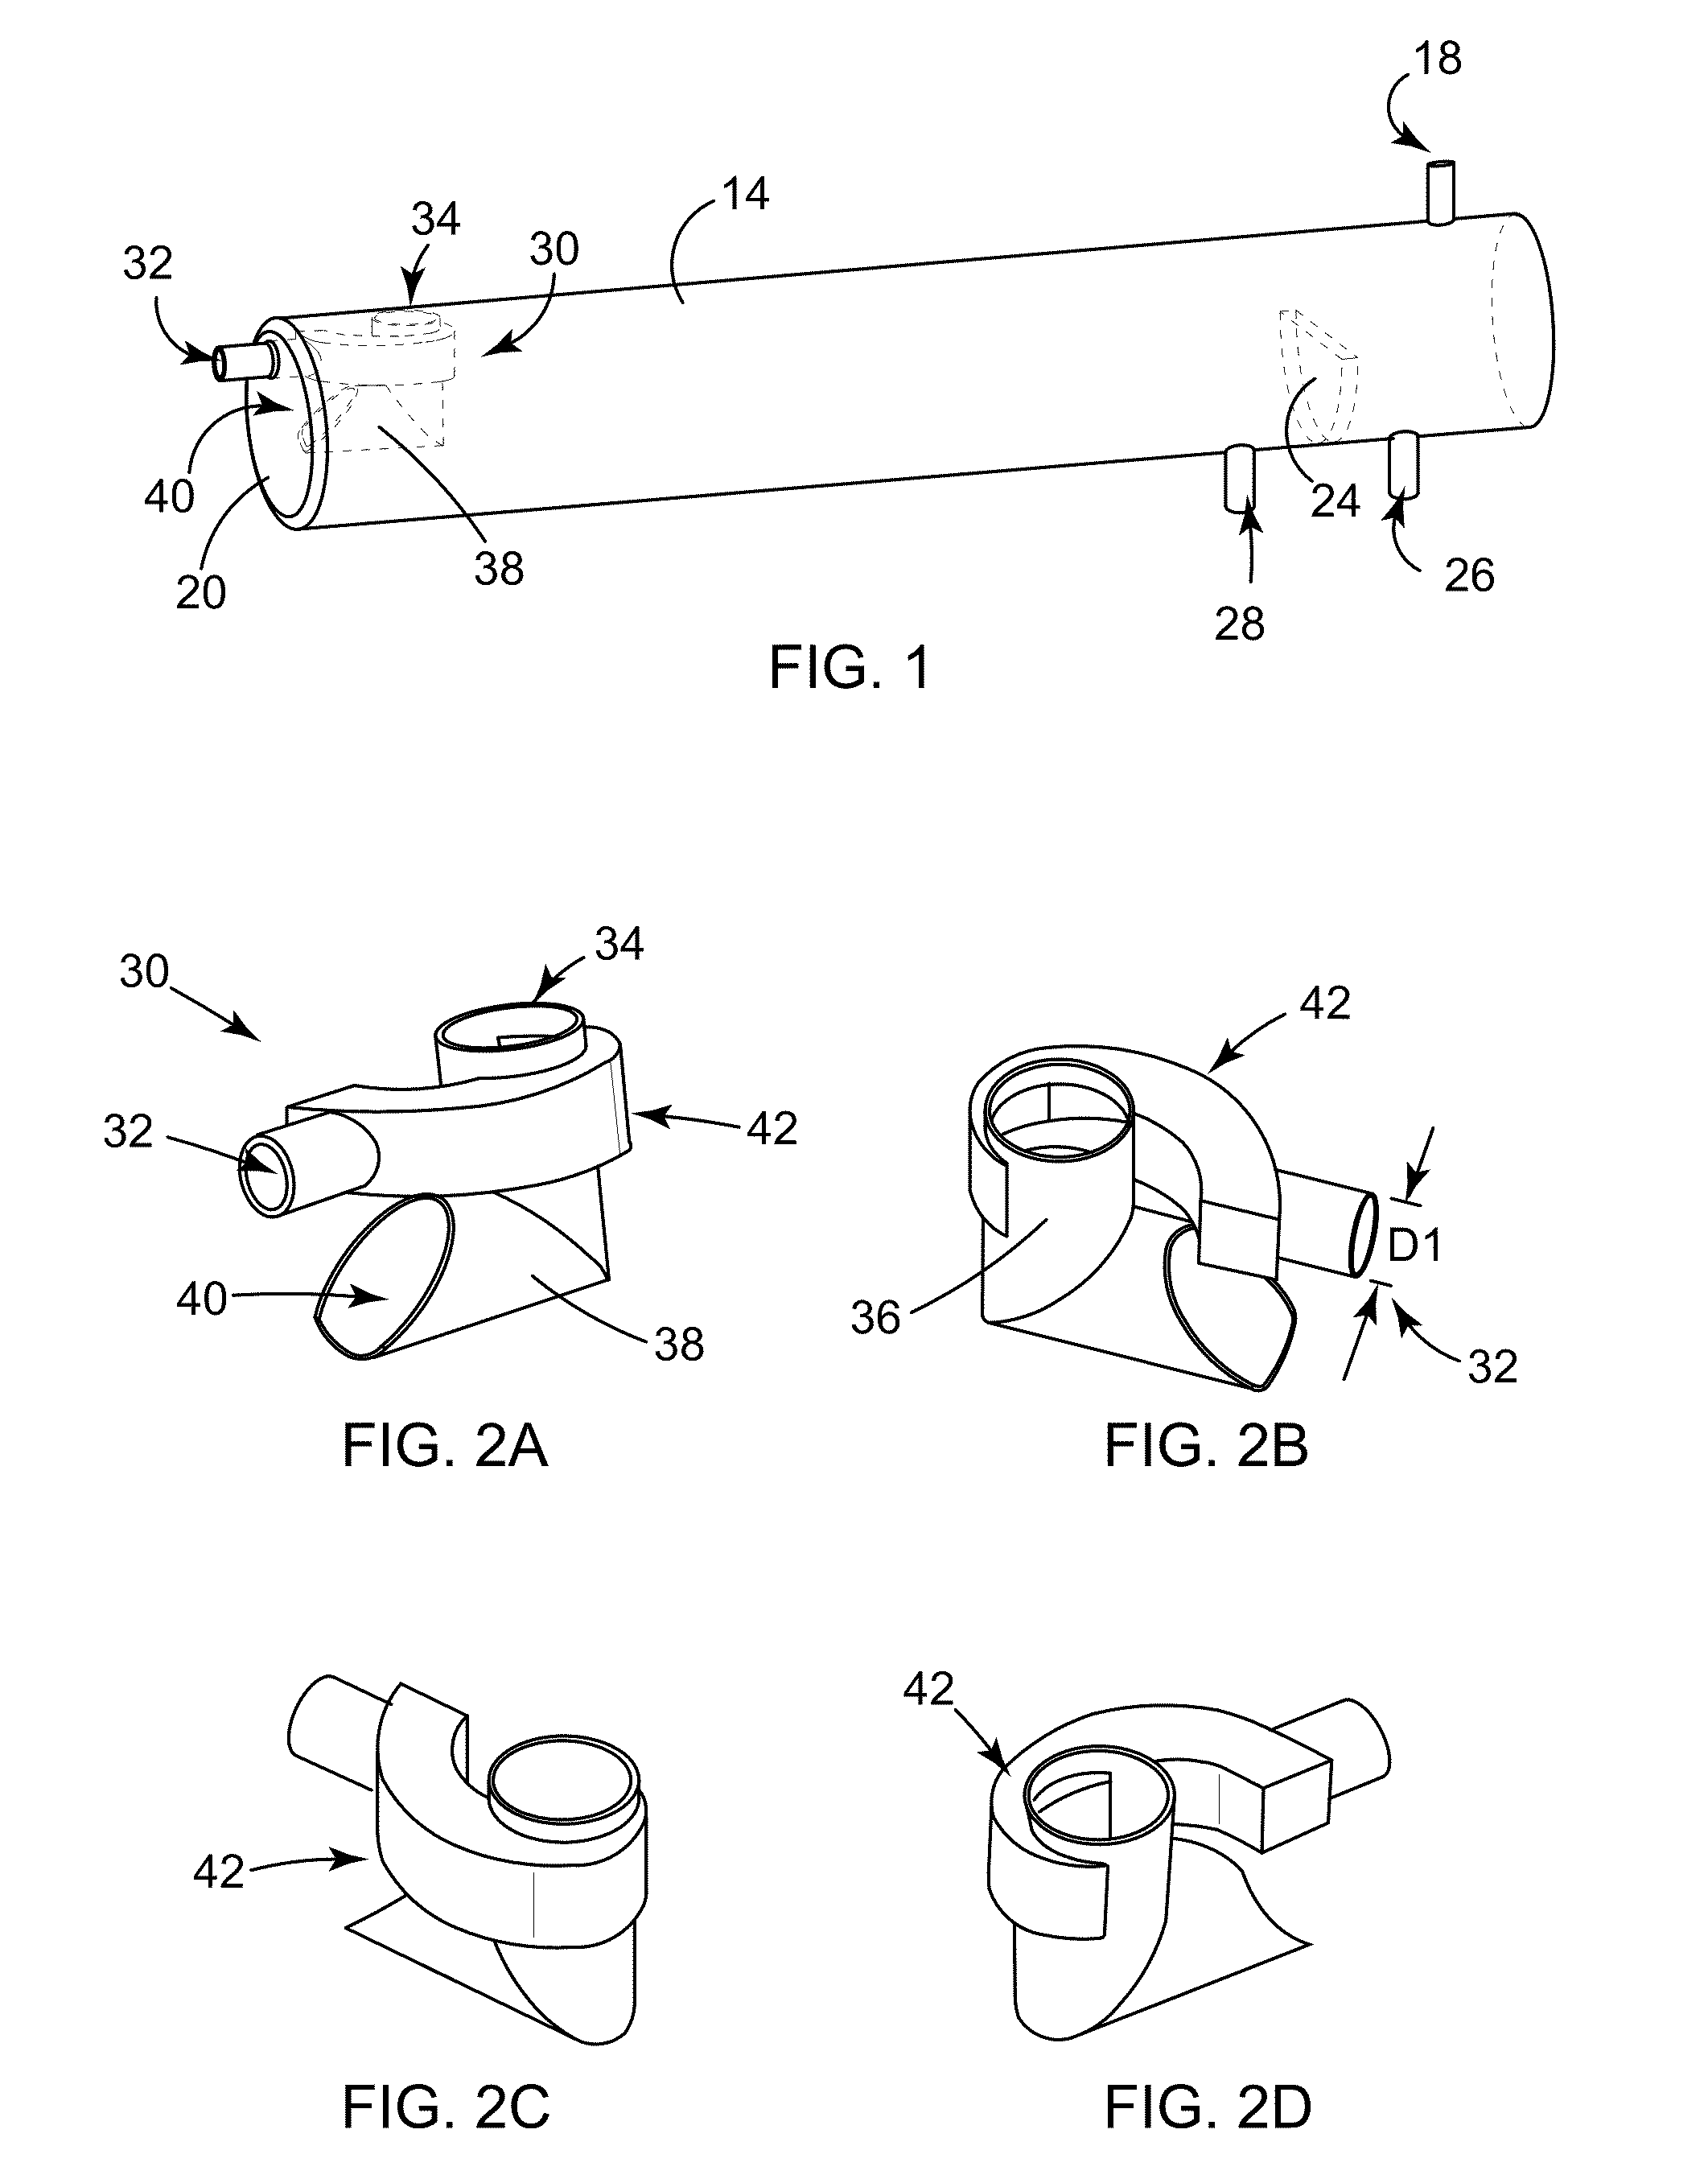 Apparatus for separation of gas-liquid mixtures and promoting coalescence of liquids